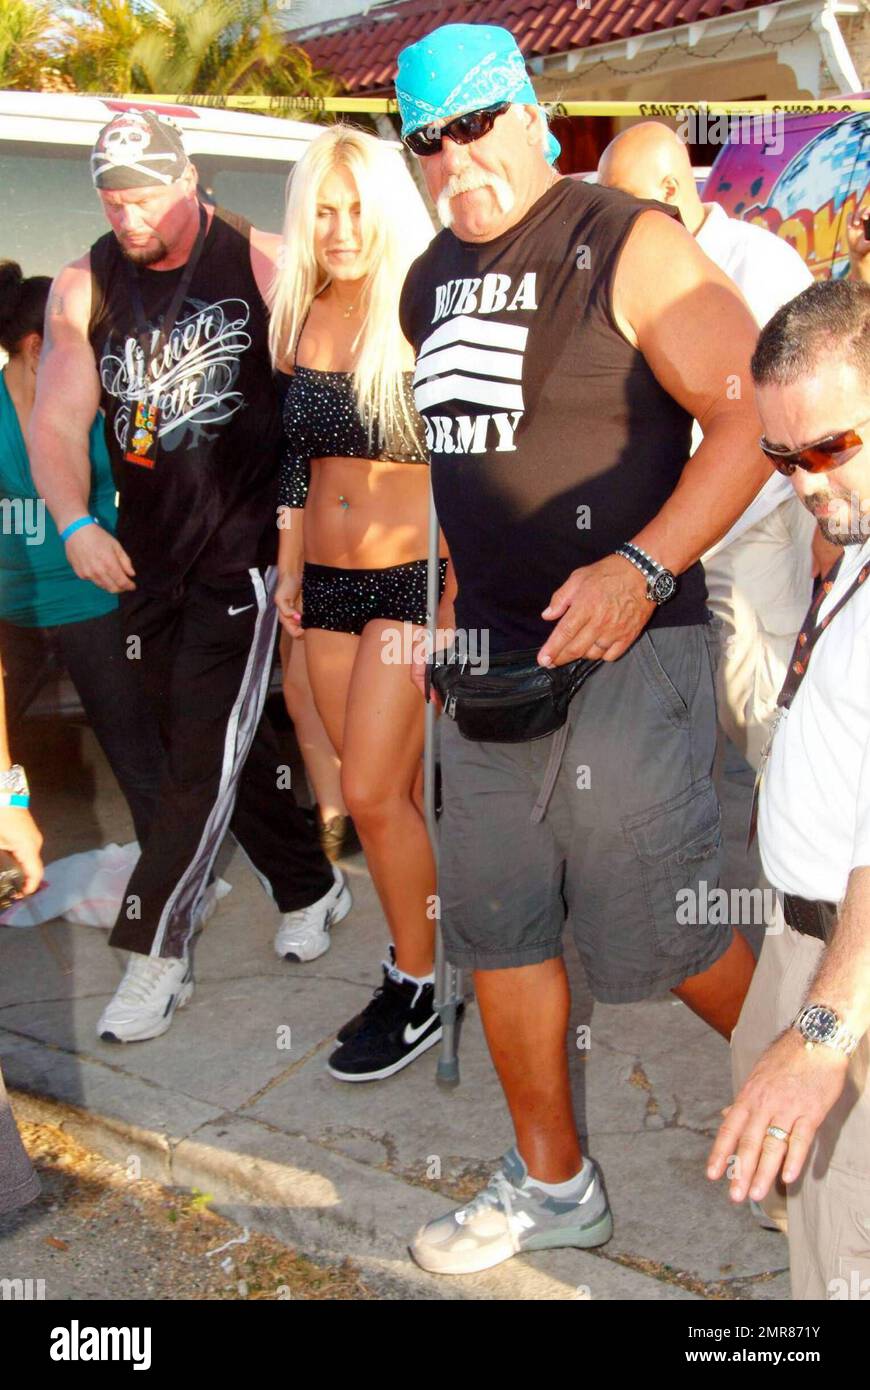 Brooke Hogan performs live during the Calle Ocho Festival in Miami's Little Havana while her dad, Hulk Hogan (aka Terry Bollea) looks on with girlfriend Jennifer McDaniel. After the performance, Brooke took some time to pose with her dad and sign autographs for fans. Miami, FL. 3/15/09. Stock Photo